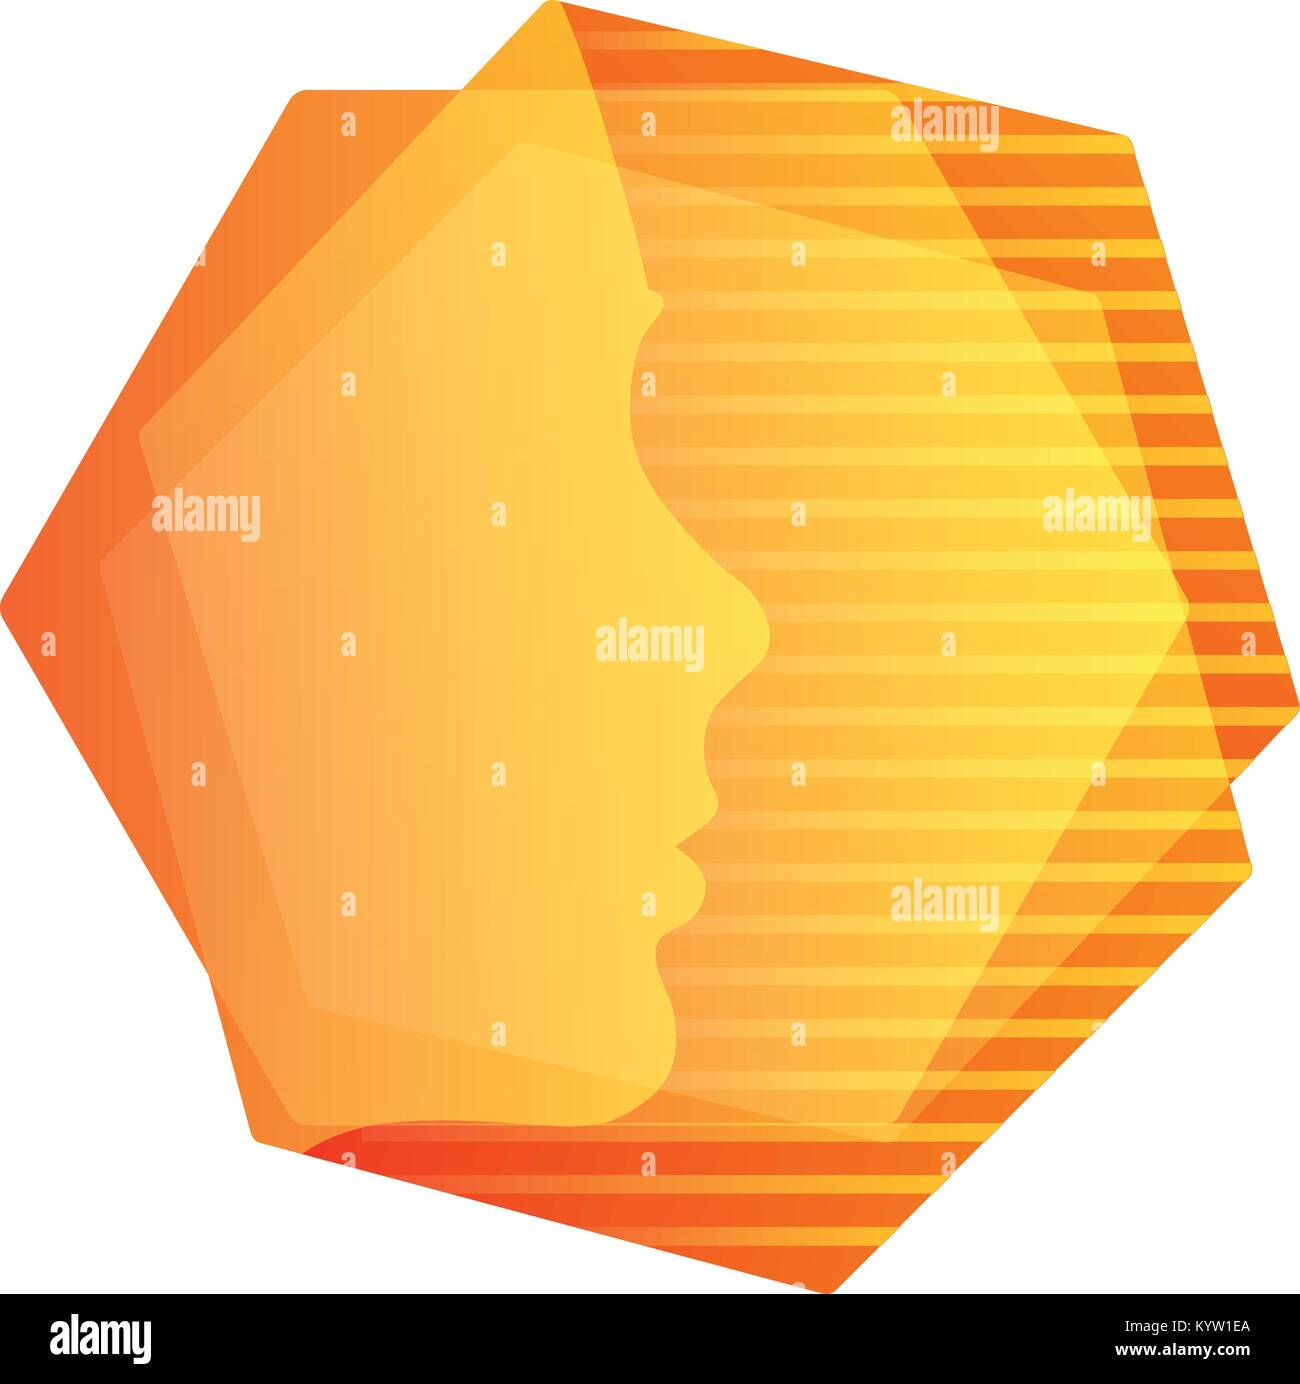 Abstarct orange geometric shape, human face in hexagons with stripes background, unusual vector logo. Stock Vector